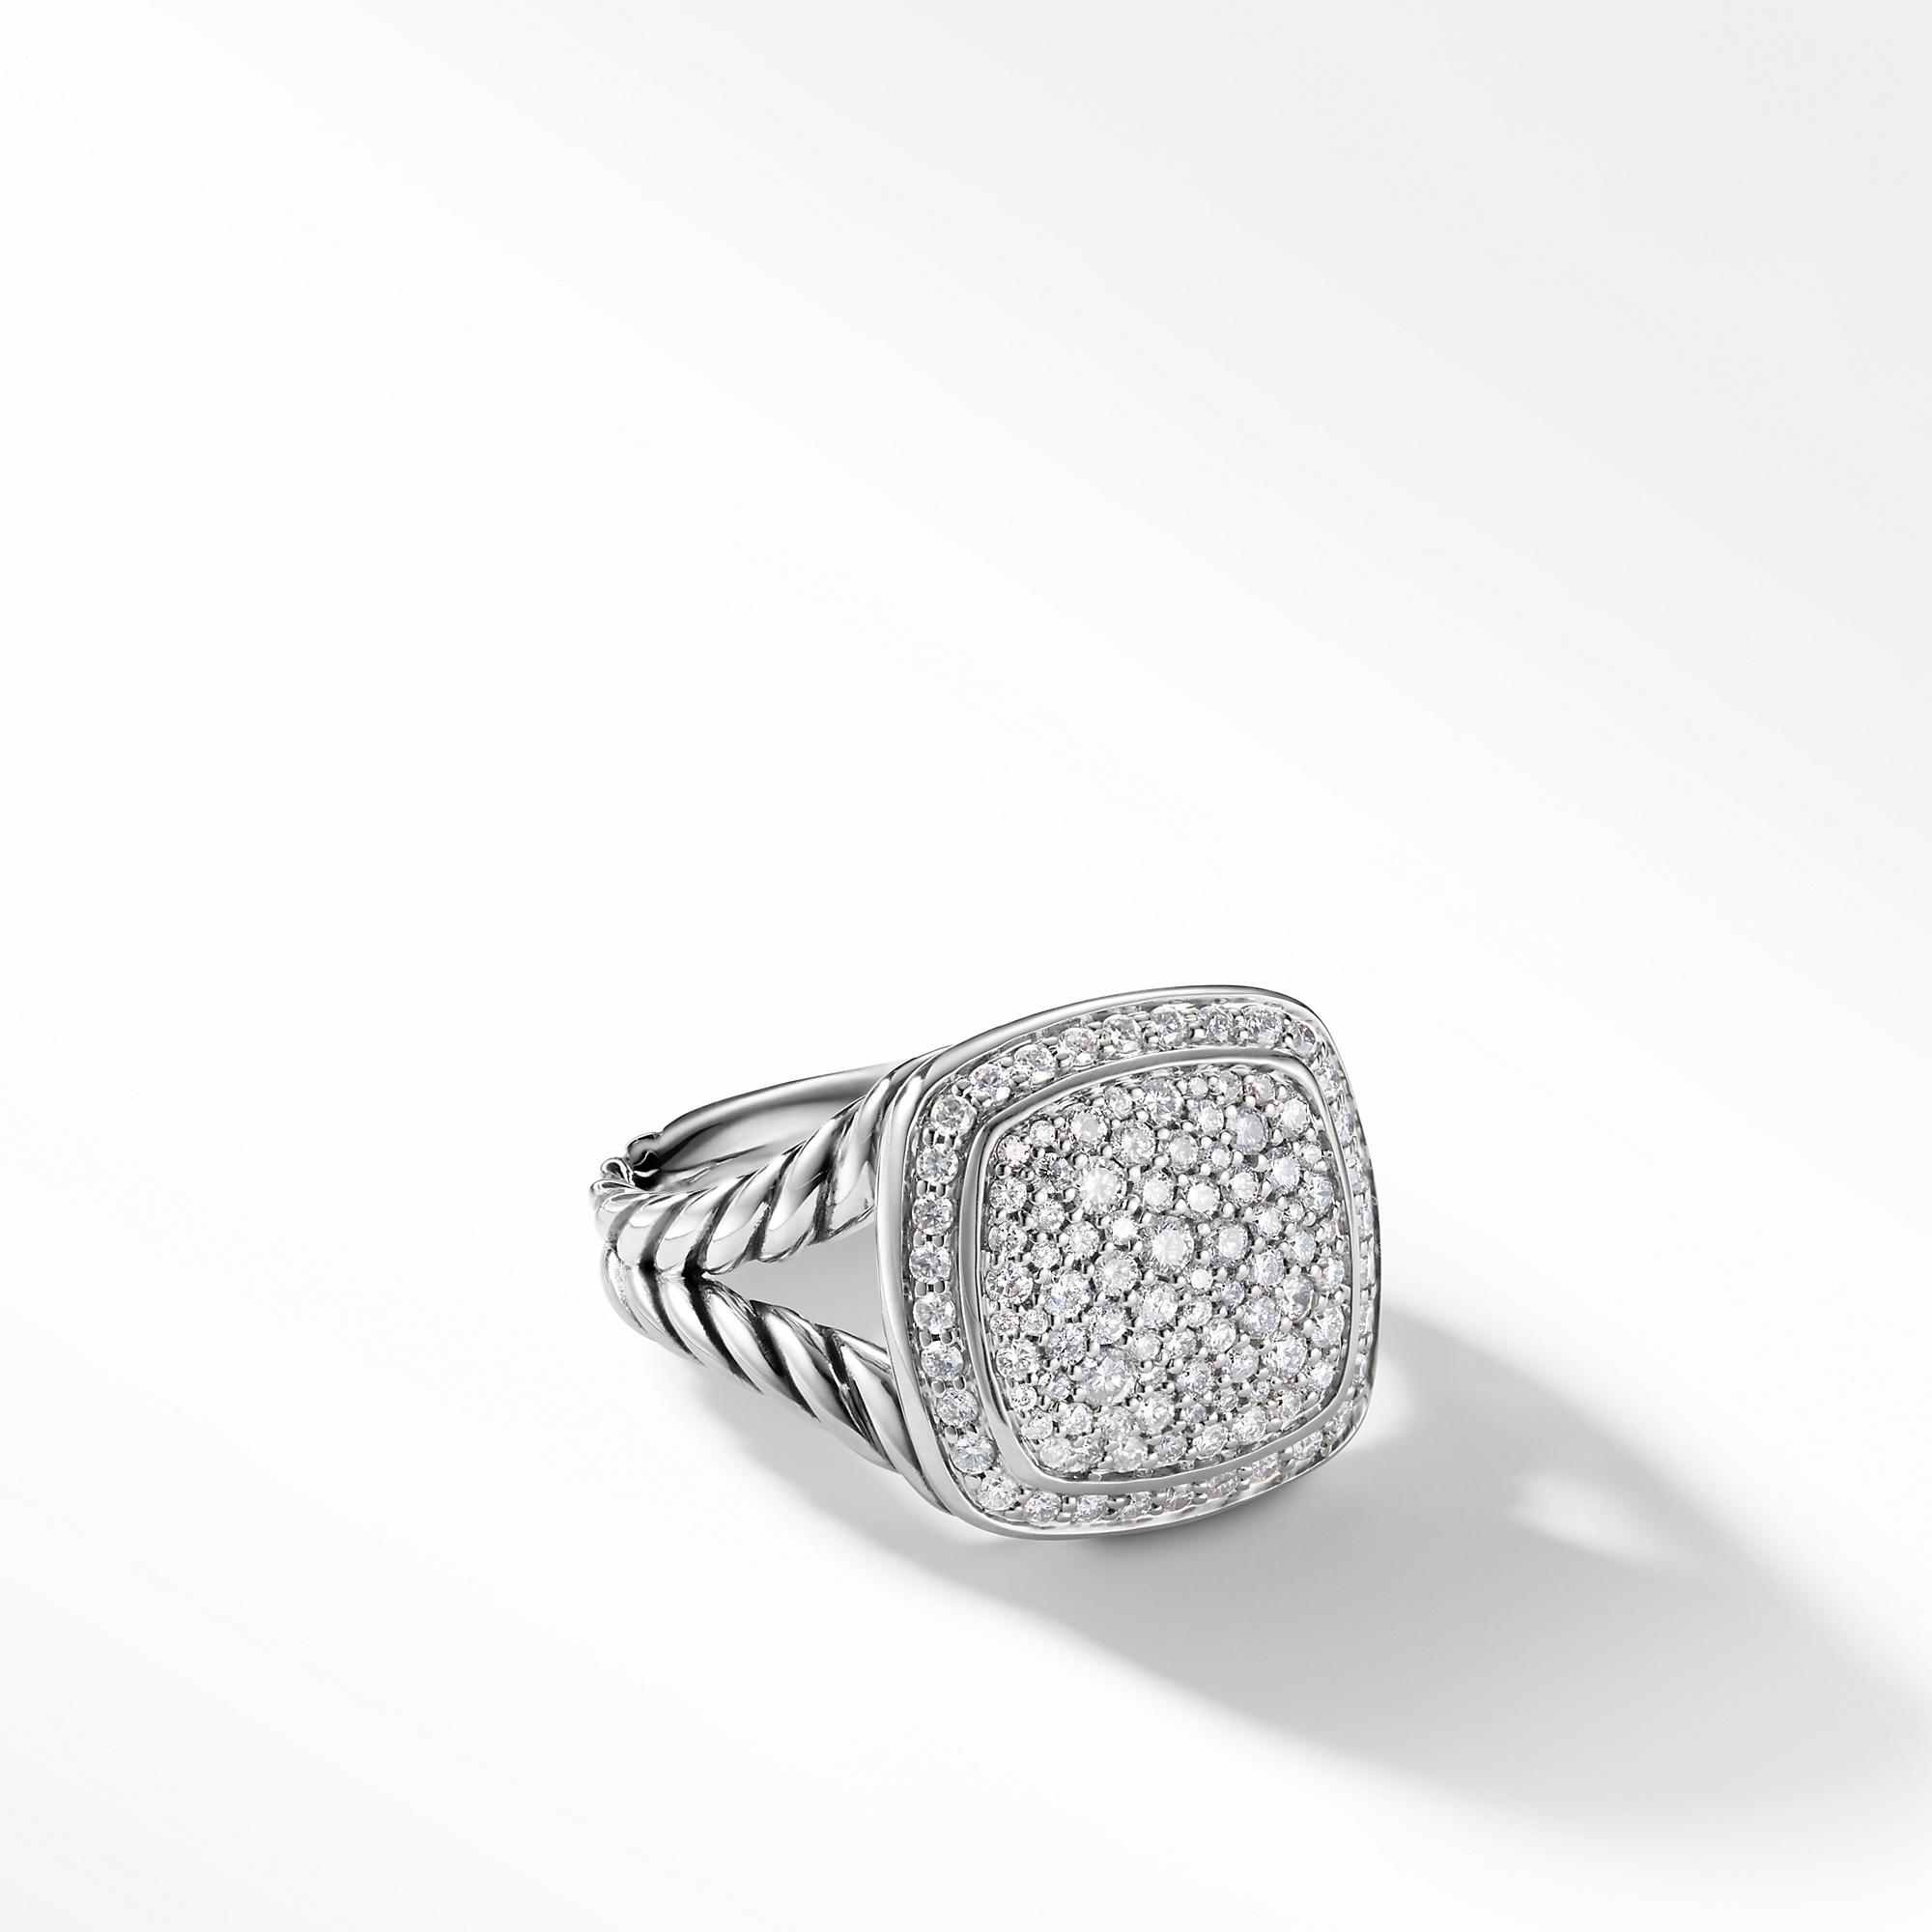 David Yurman 11mm Albion Ring in Sterling Silver with Pave Diamonds, size 7